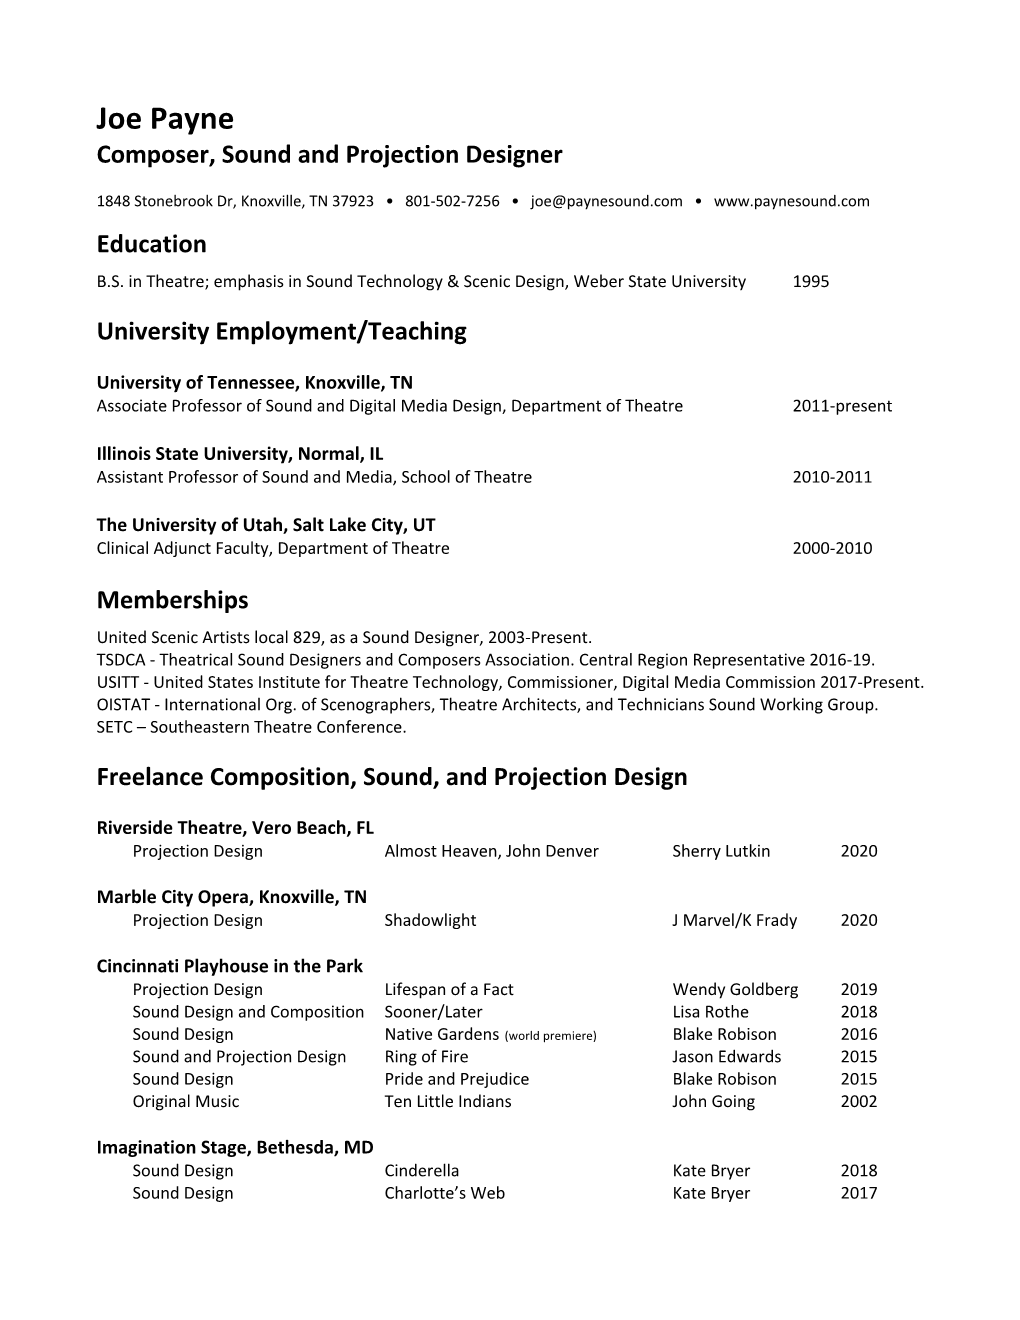 To Download the PDF Resume